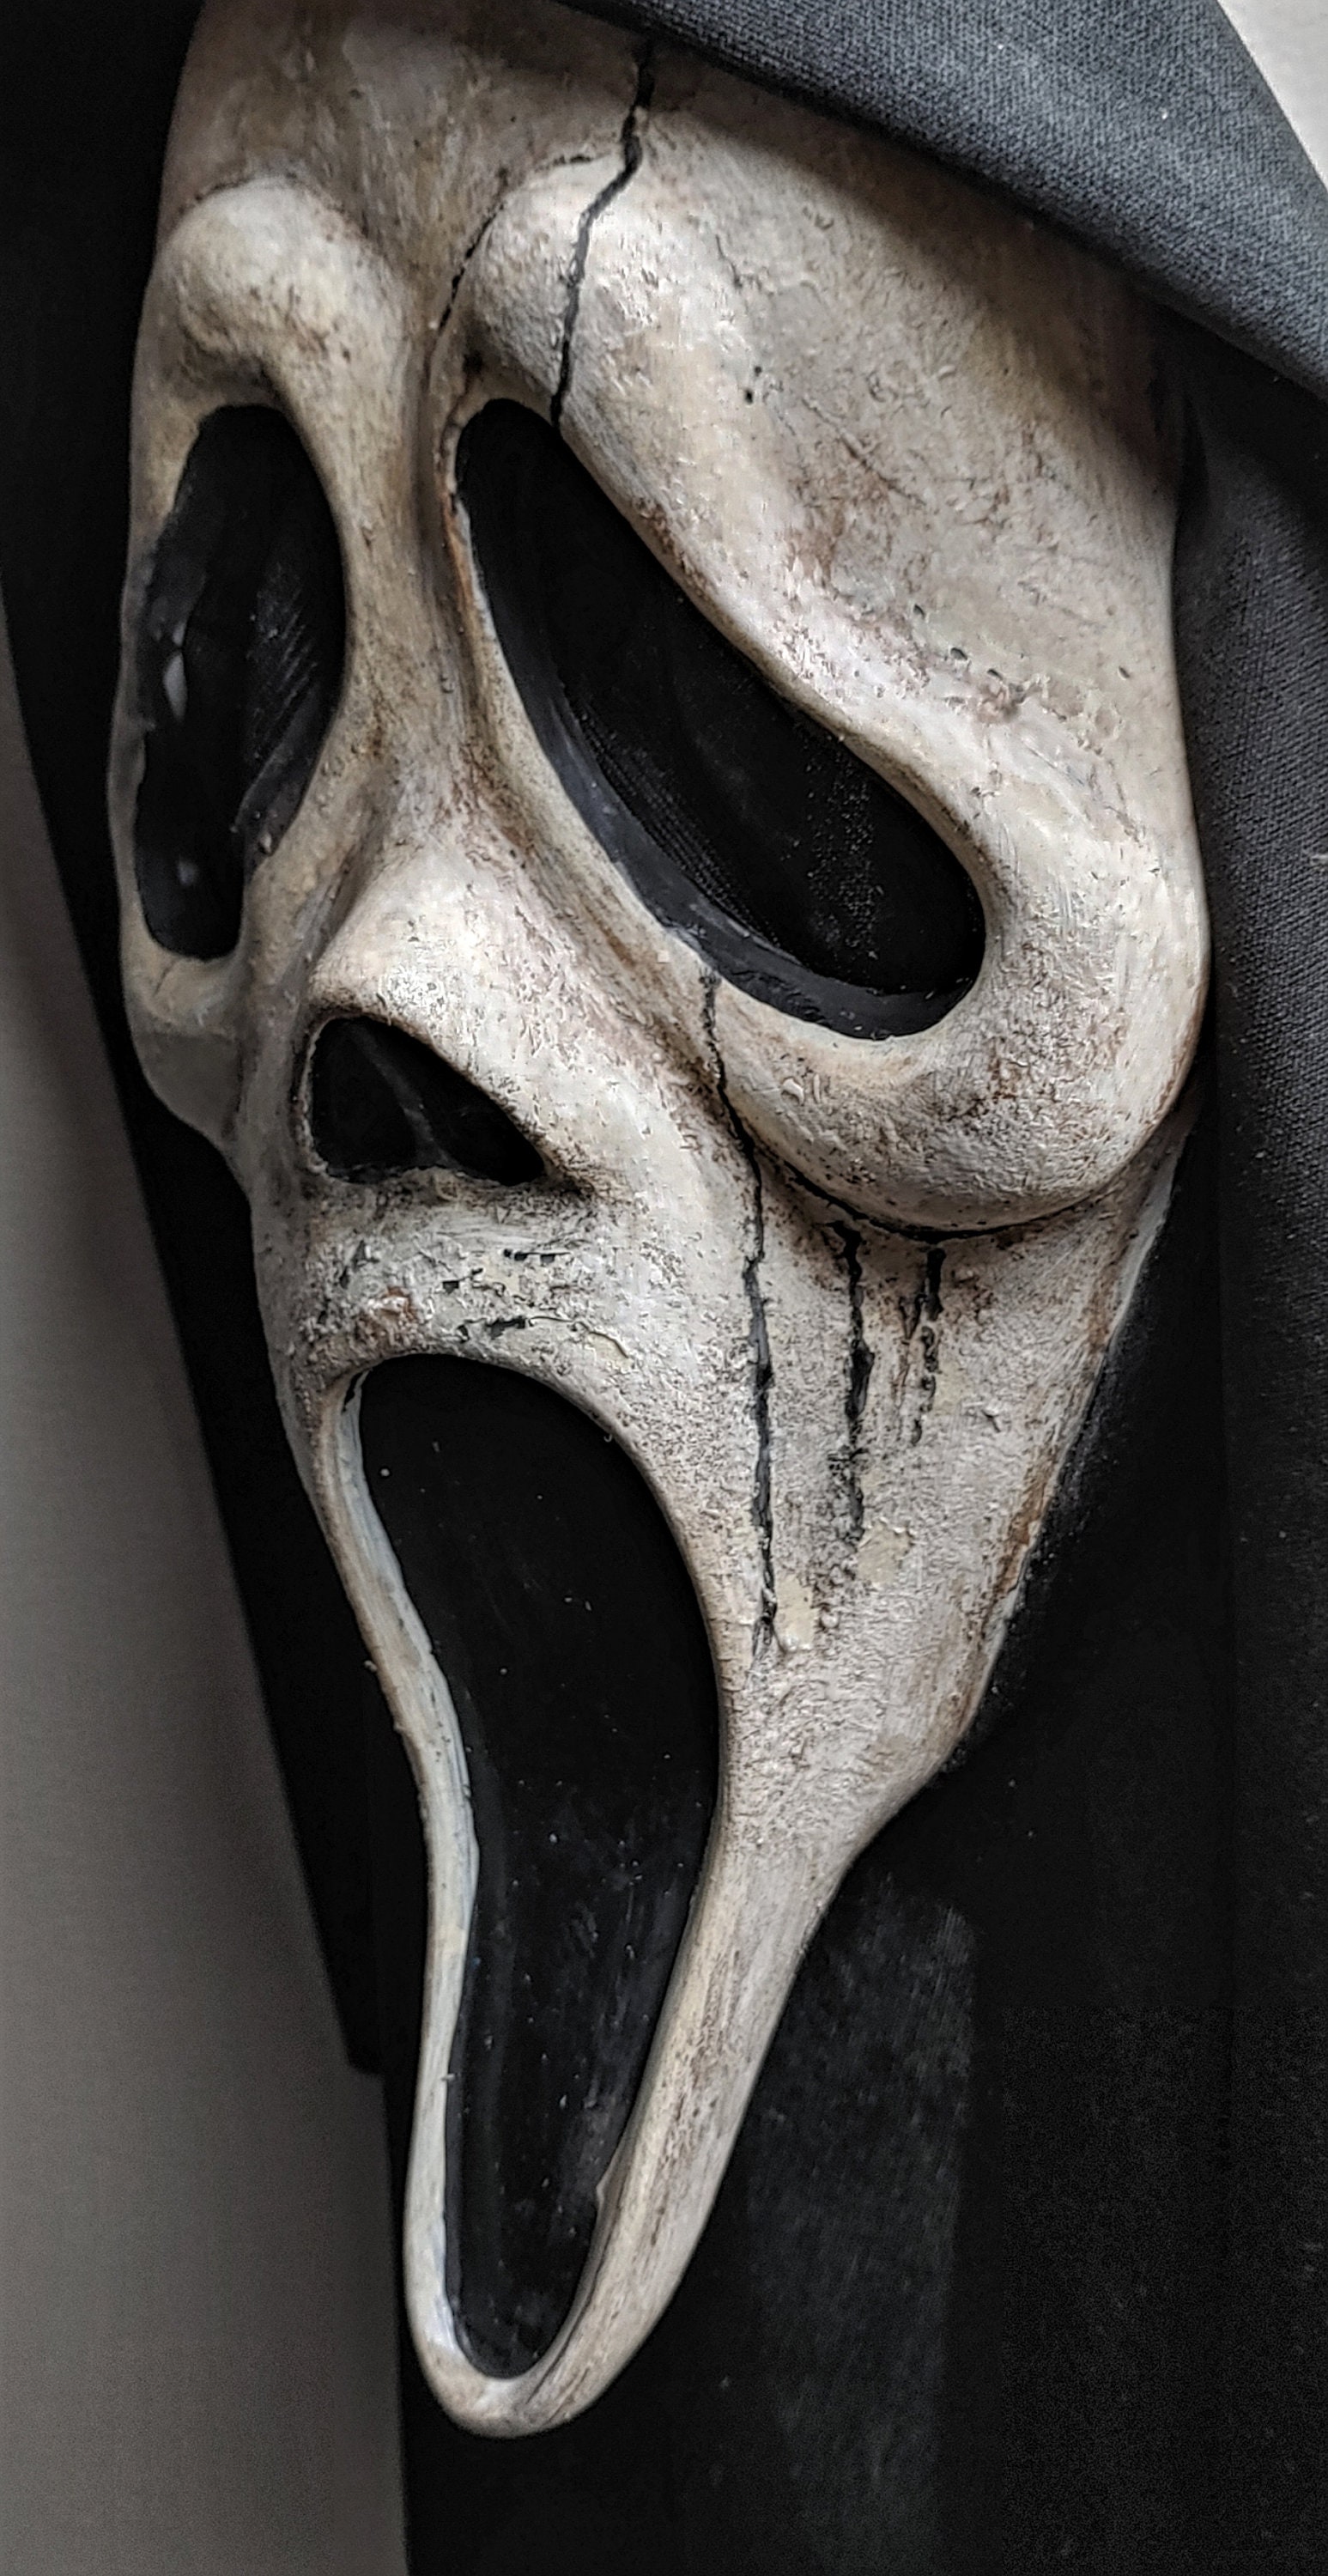 Scream Ghost face Mask Display